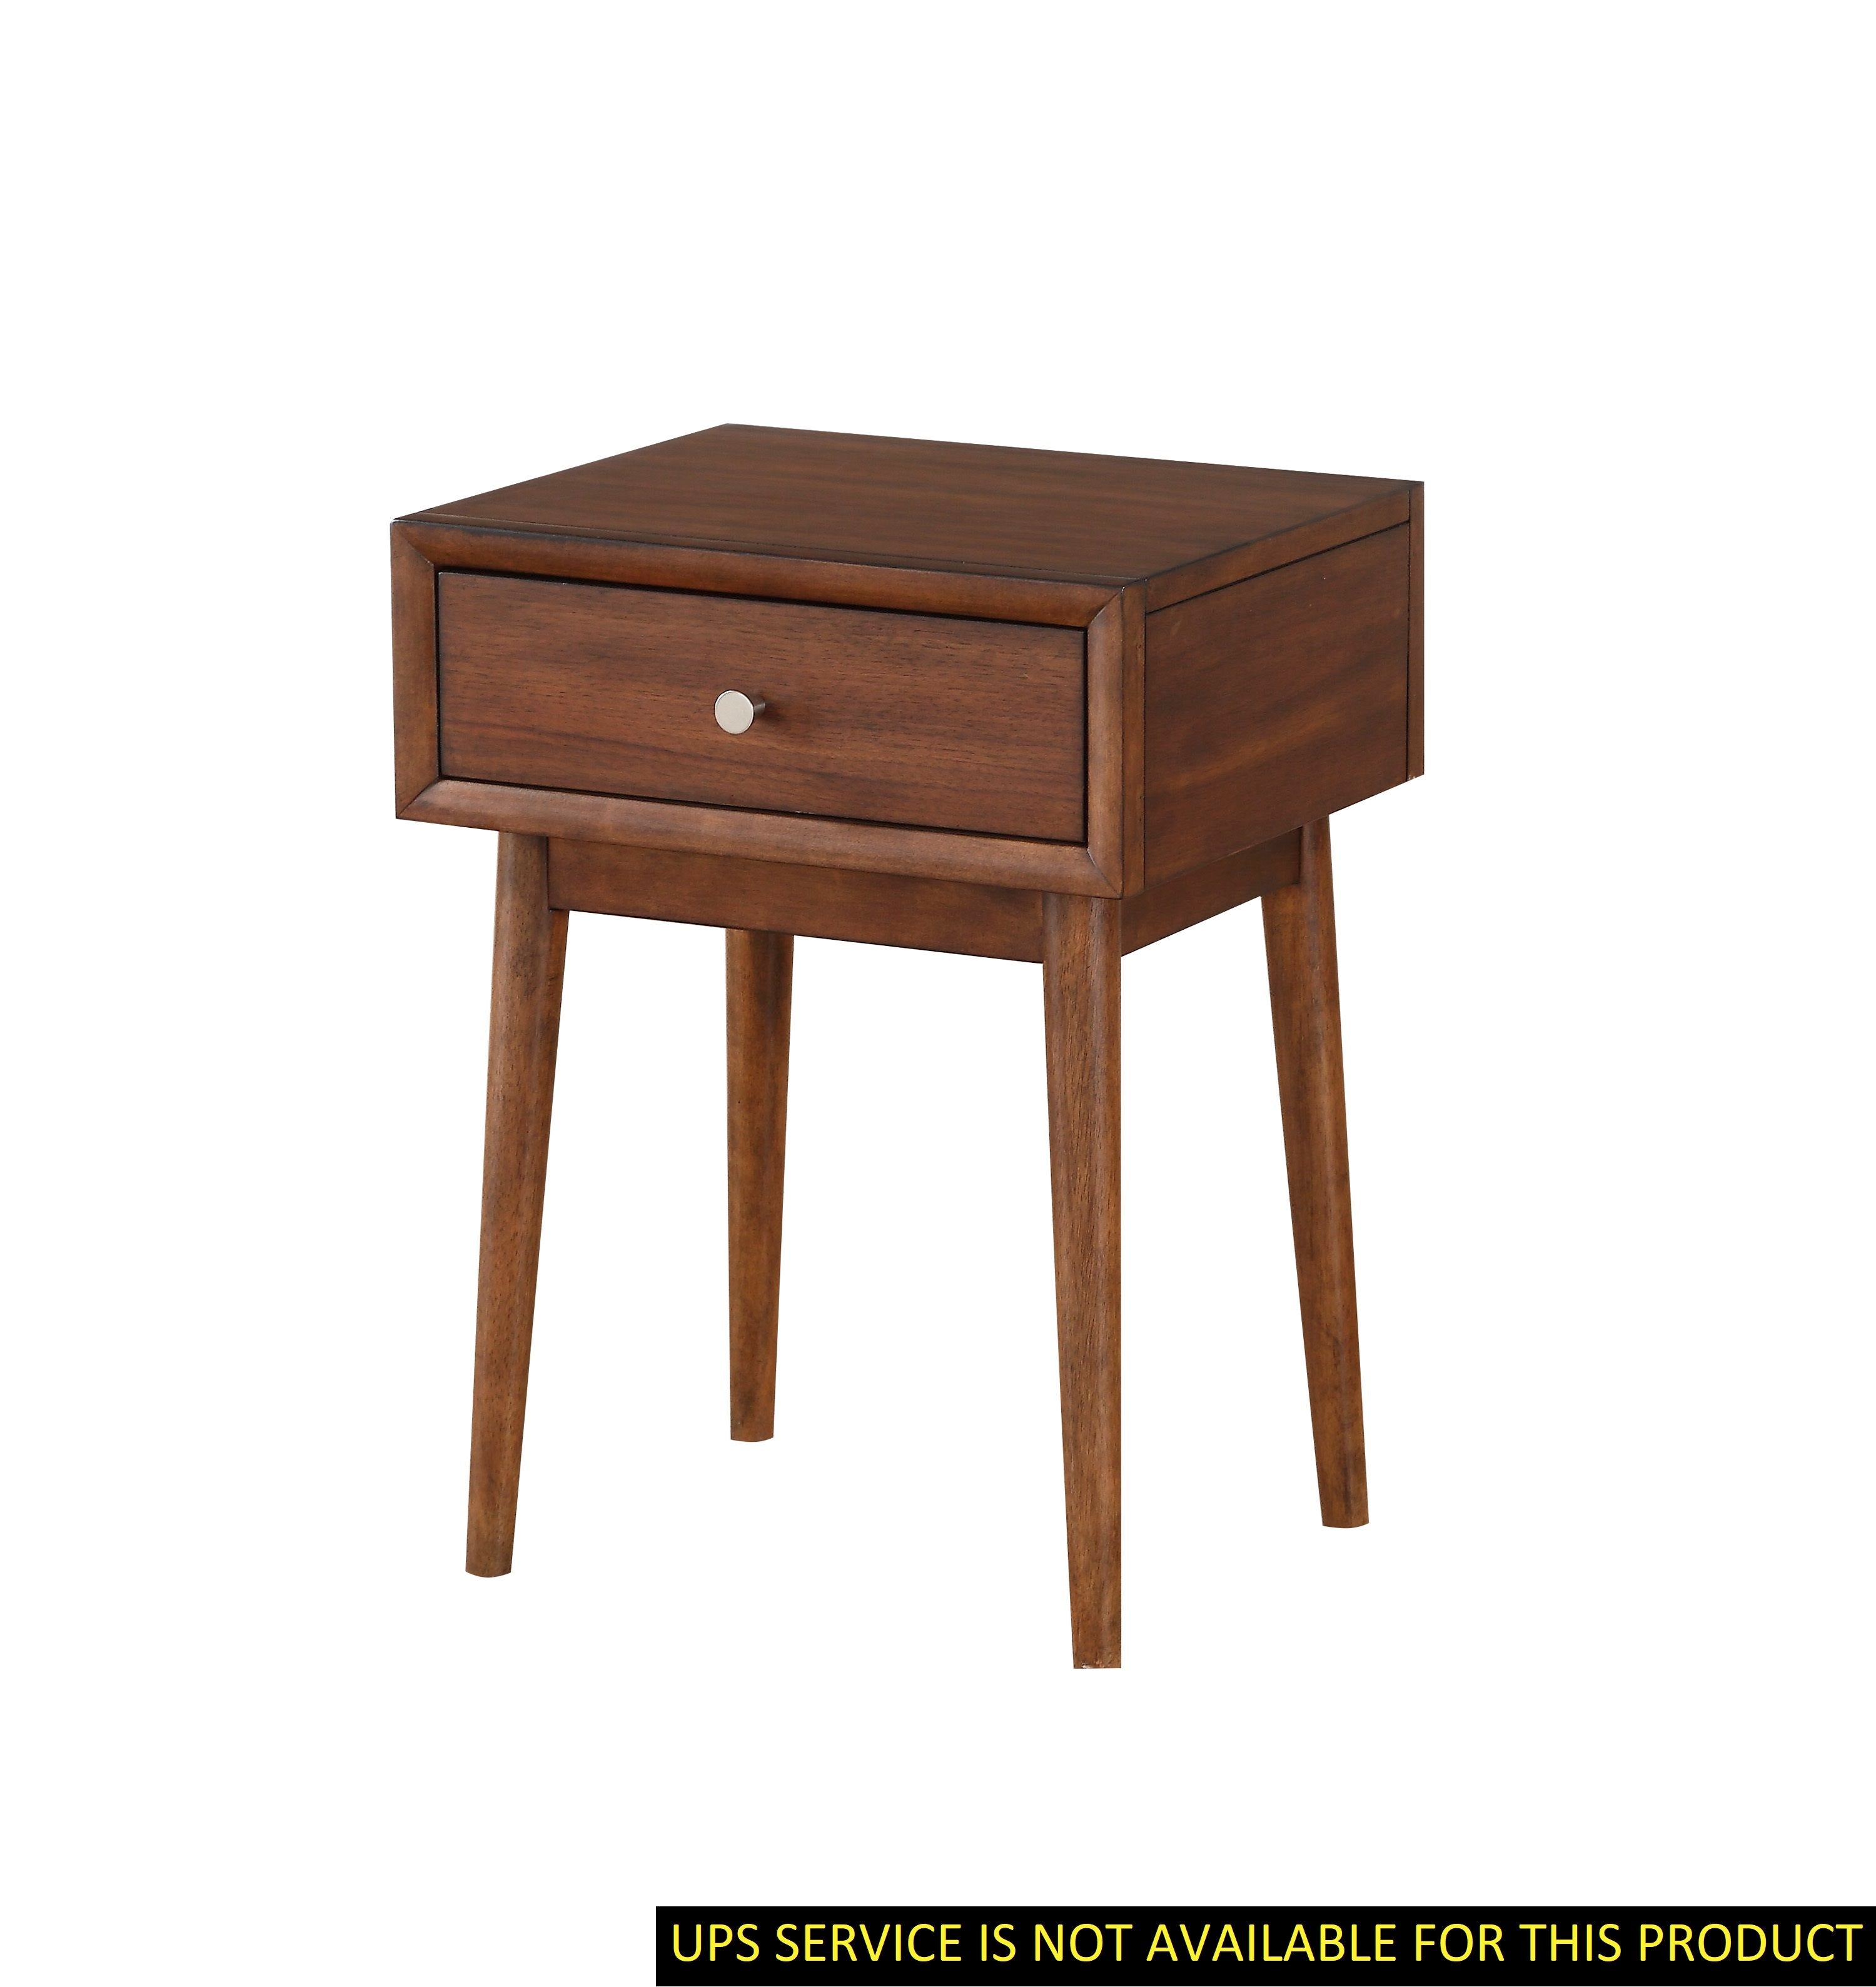 Modern Style 1 Piece End Table Drawer Brown Finish Living Room Furniture Stylish Table